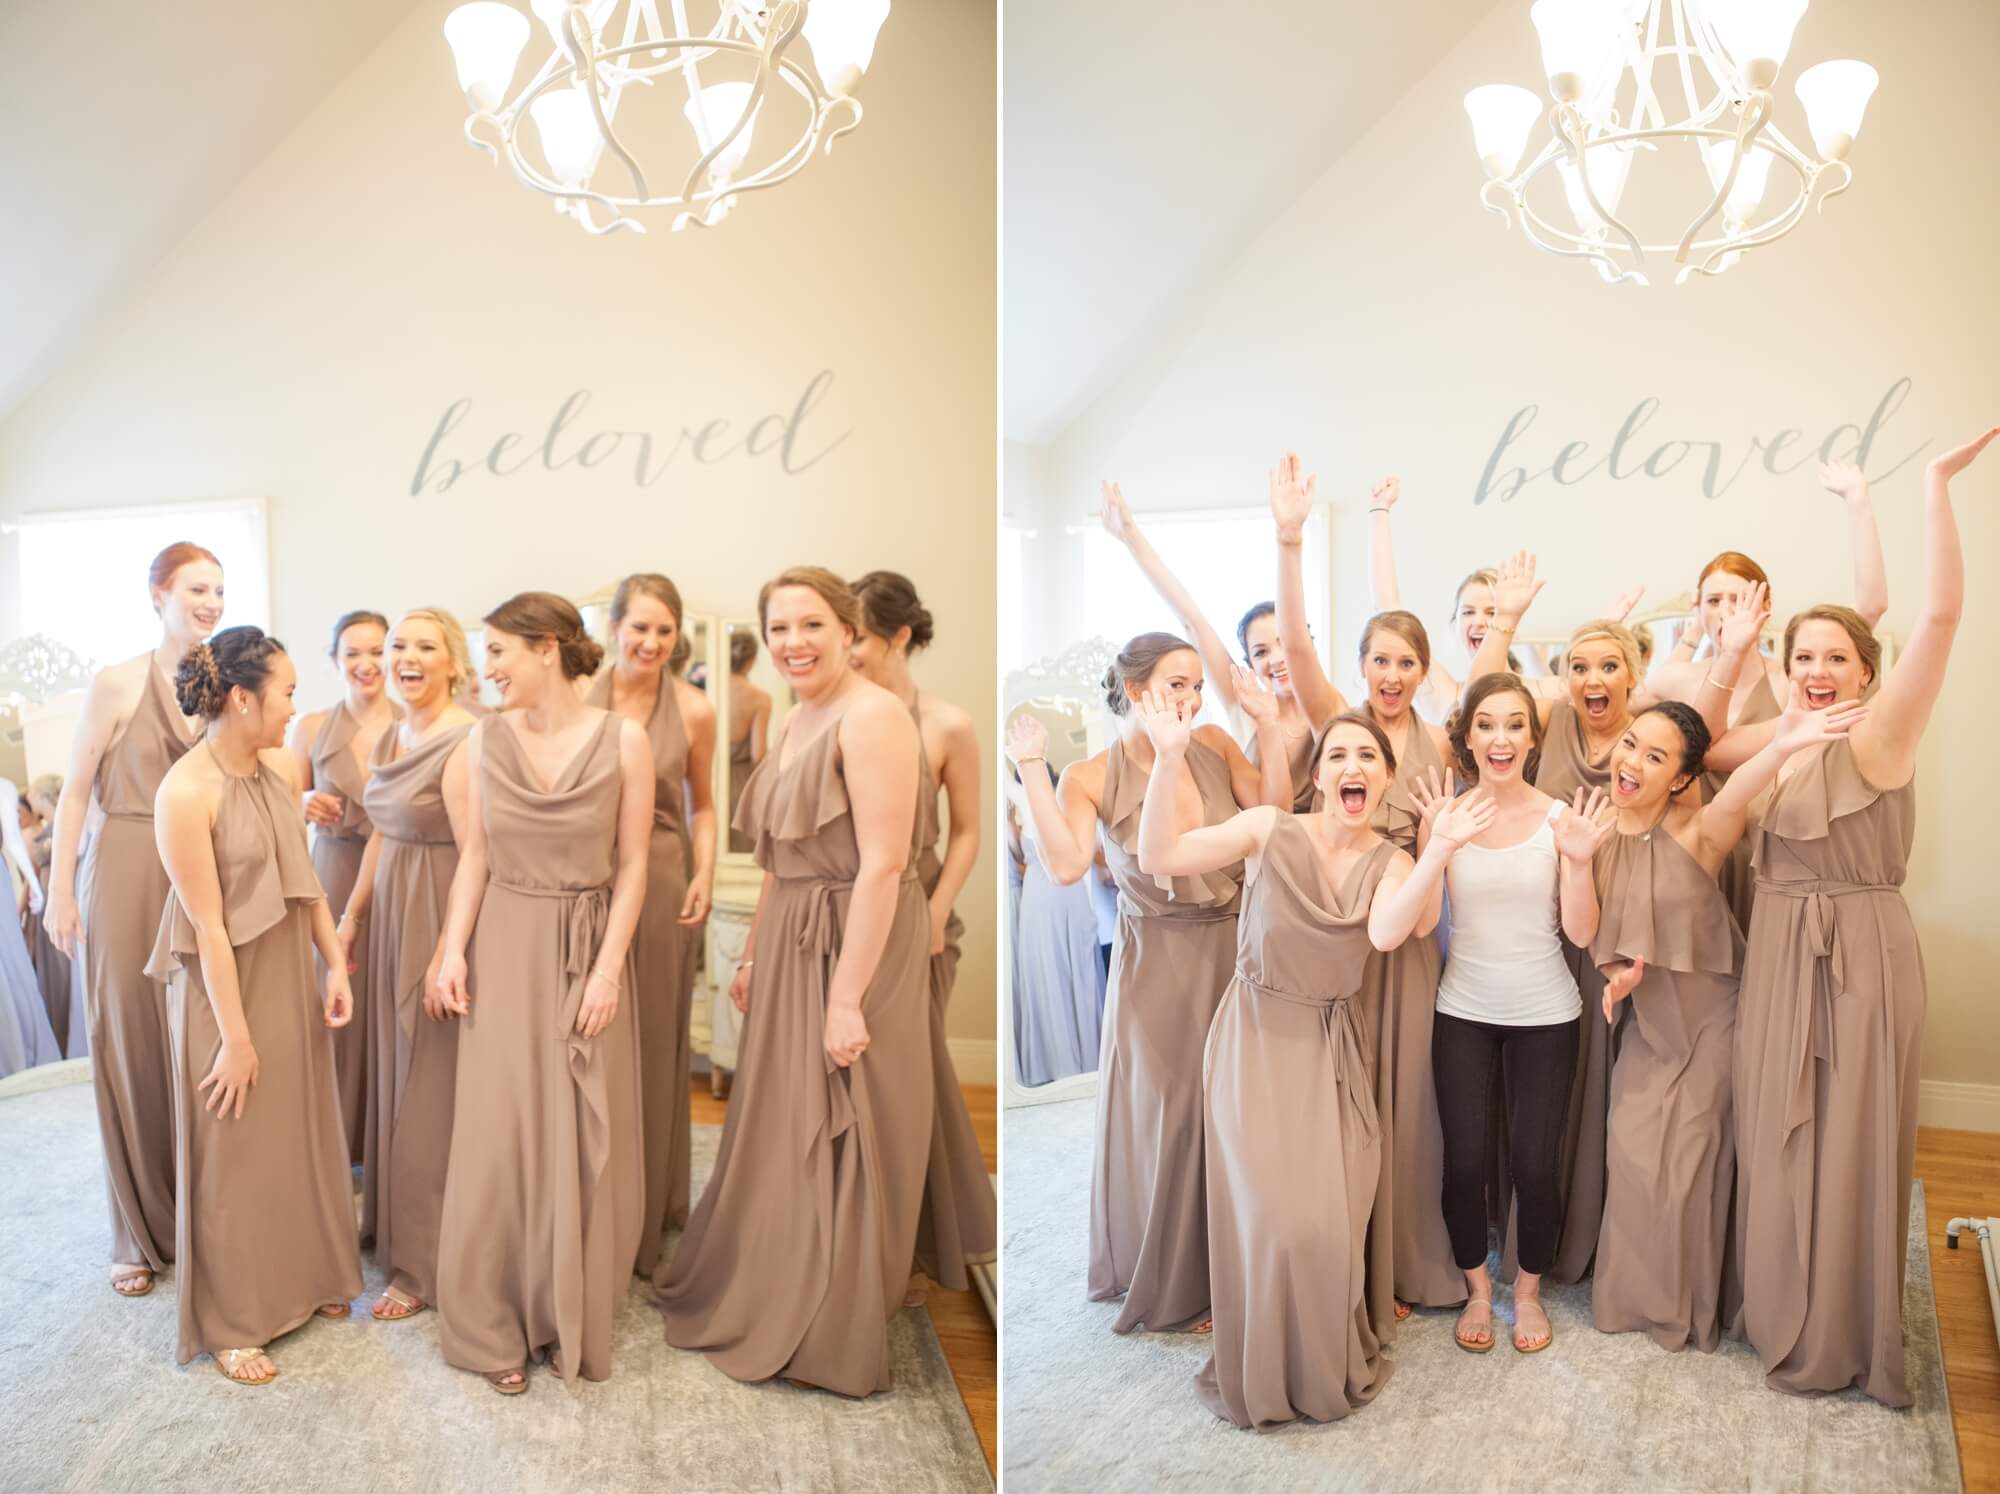 Bridesmaids getting ready in bridal suite. Spring wedding at Cedarwood Weddings in Nashville, TN. Photo by Krista Lee Photography, from Sam and Izzy's wedding day.